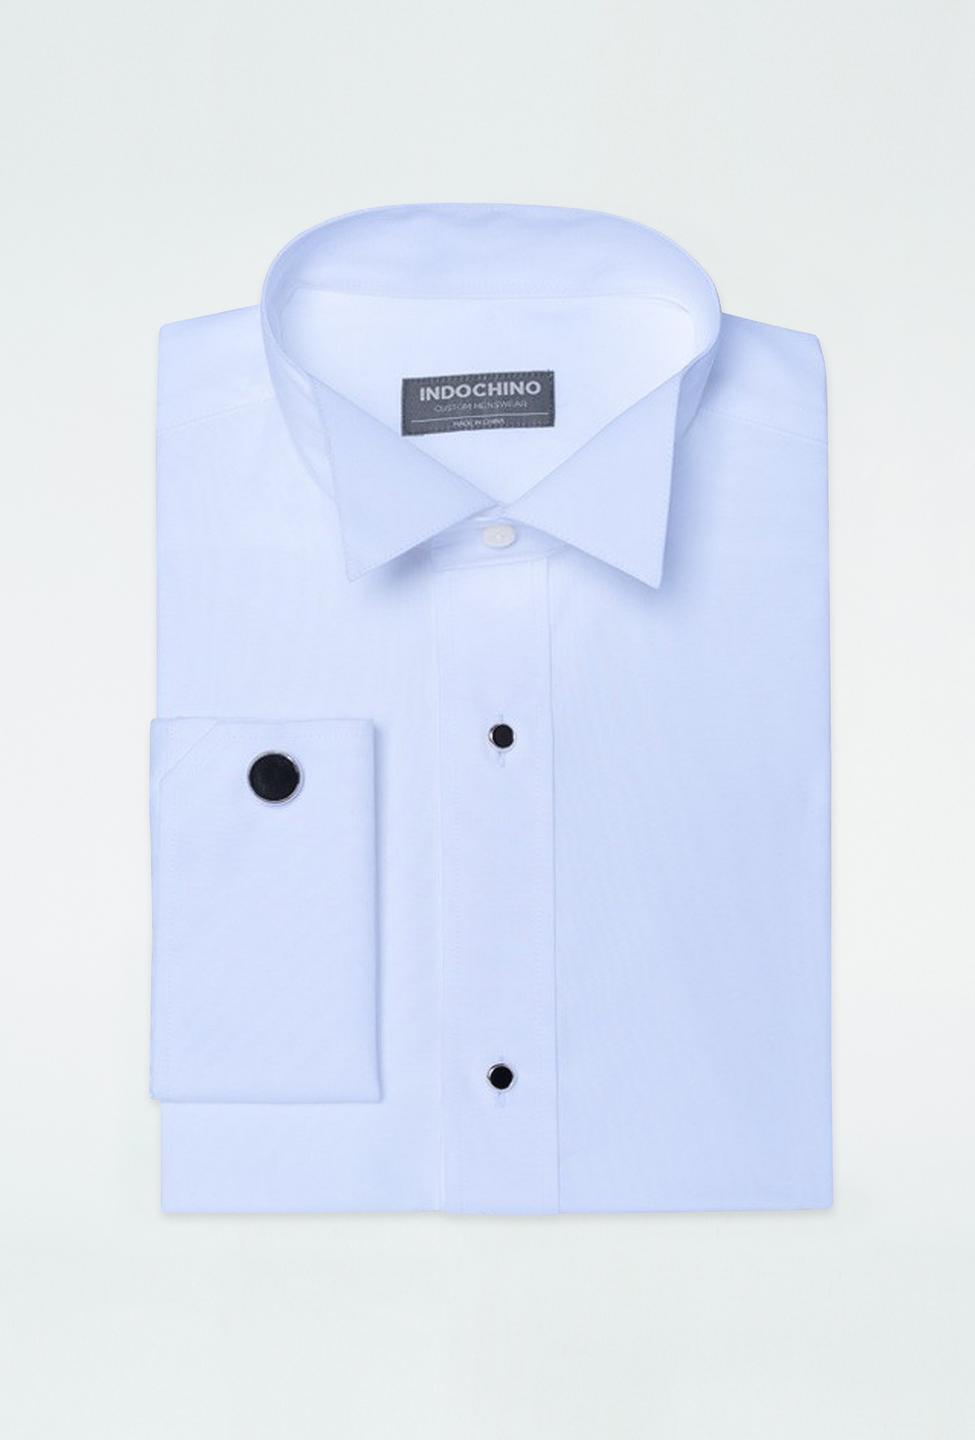 Blue shirt - Helston Solid Design from Premium Indochino Collection